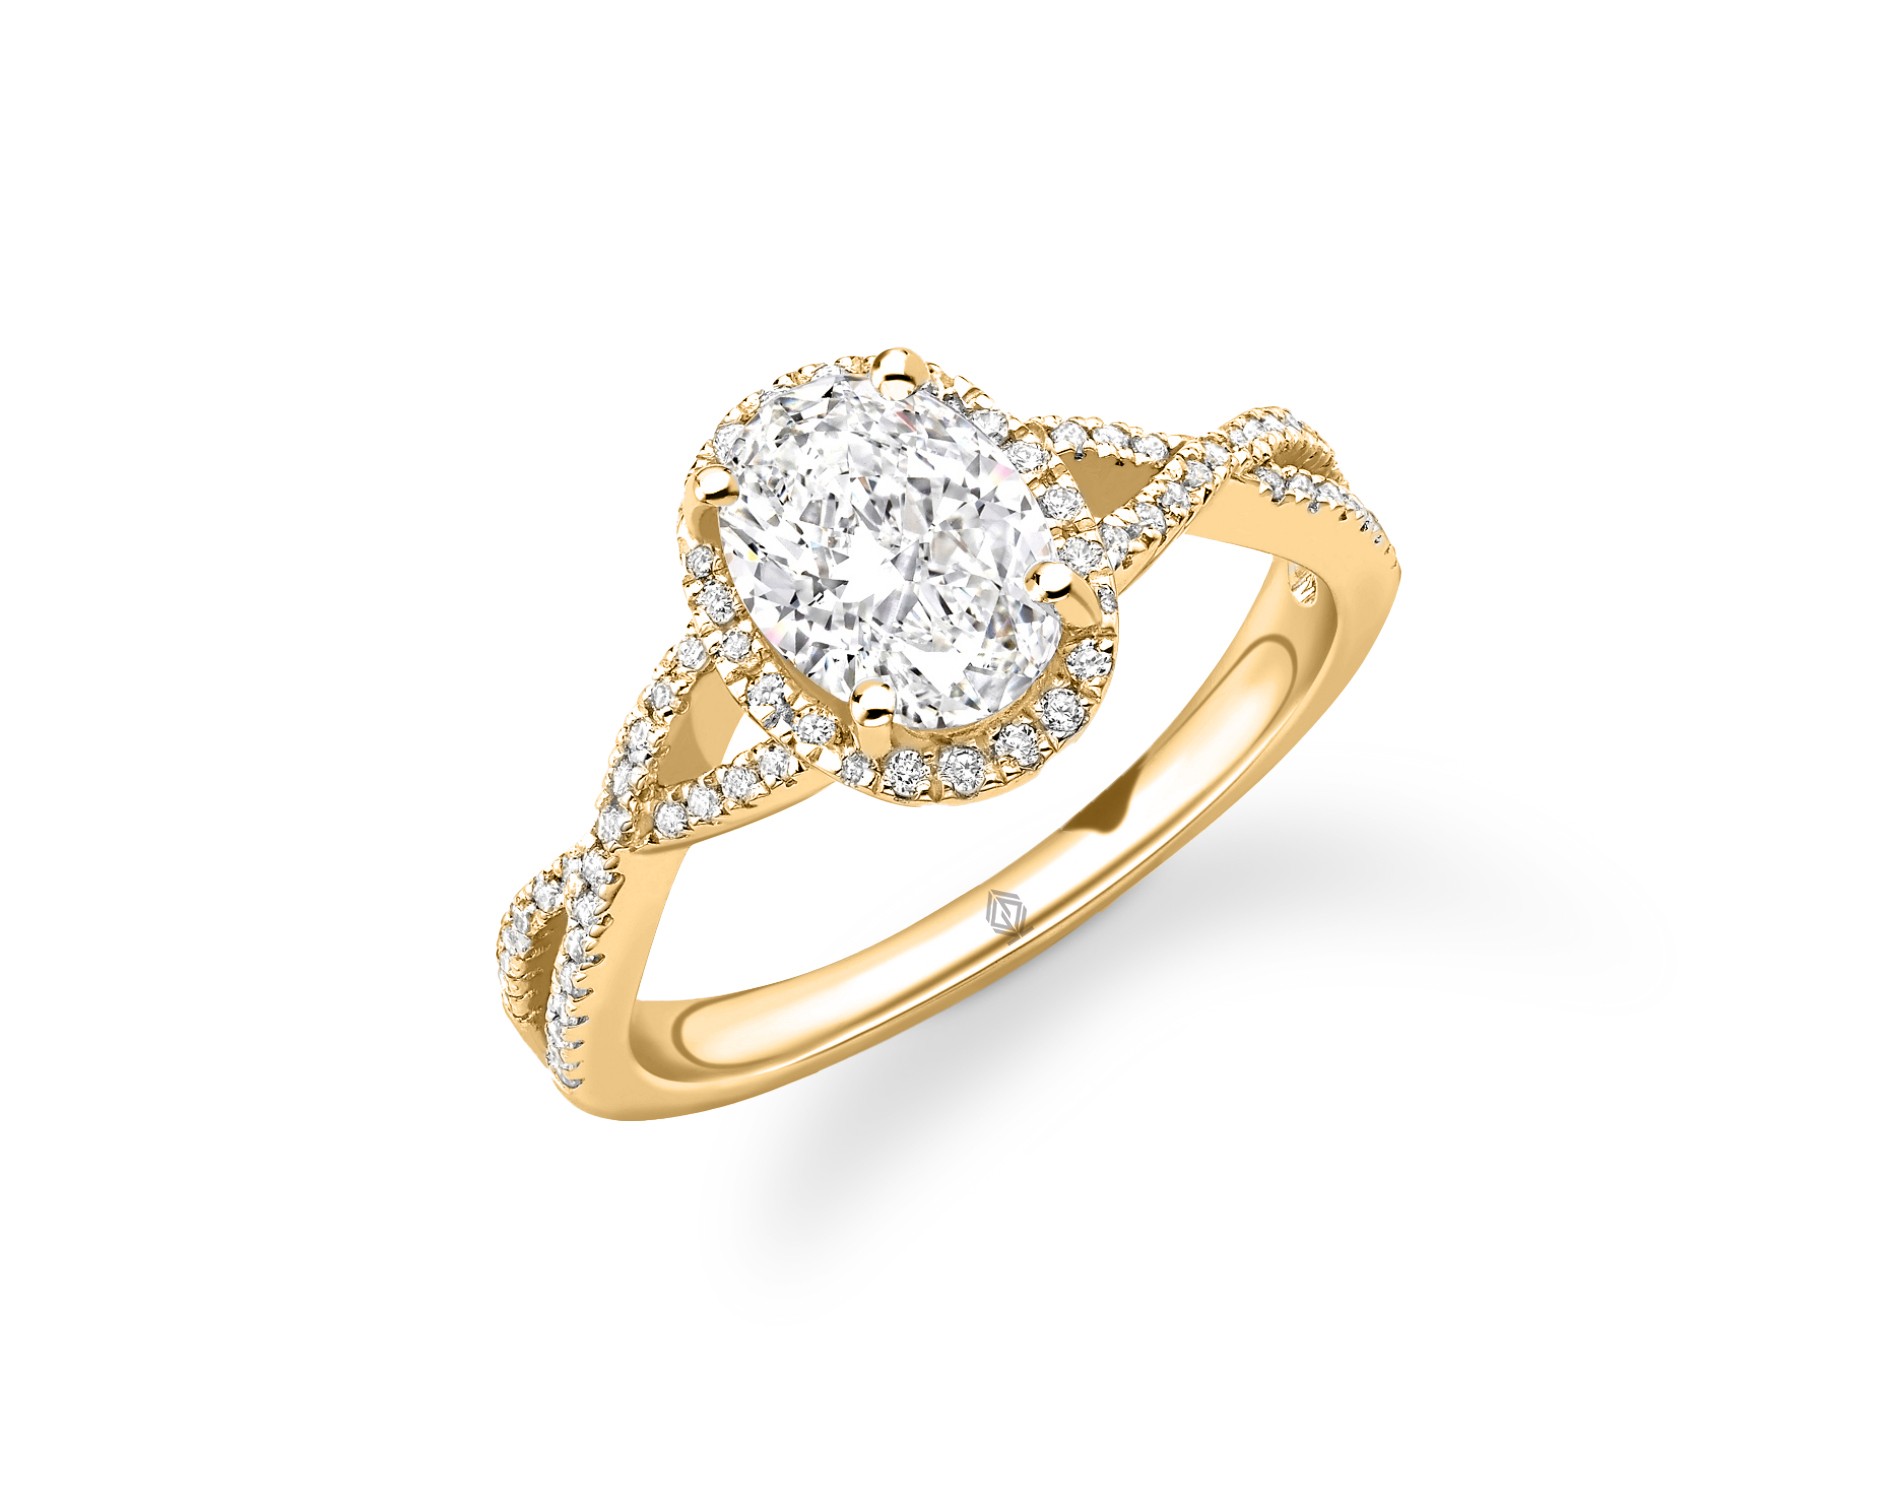 18K YELLOW GOLD OVAL CUT HALO DIAMOND ENGAGEMENT RING WITH TWISTED SHANK